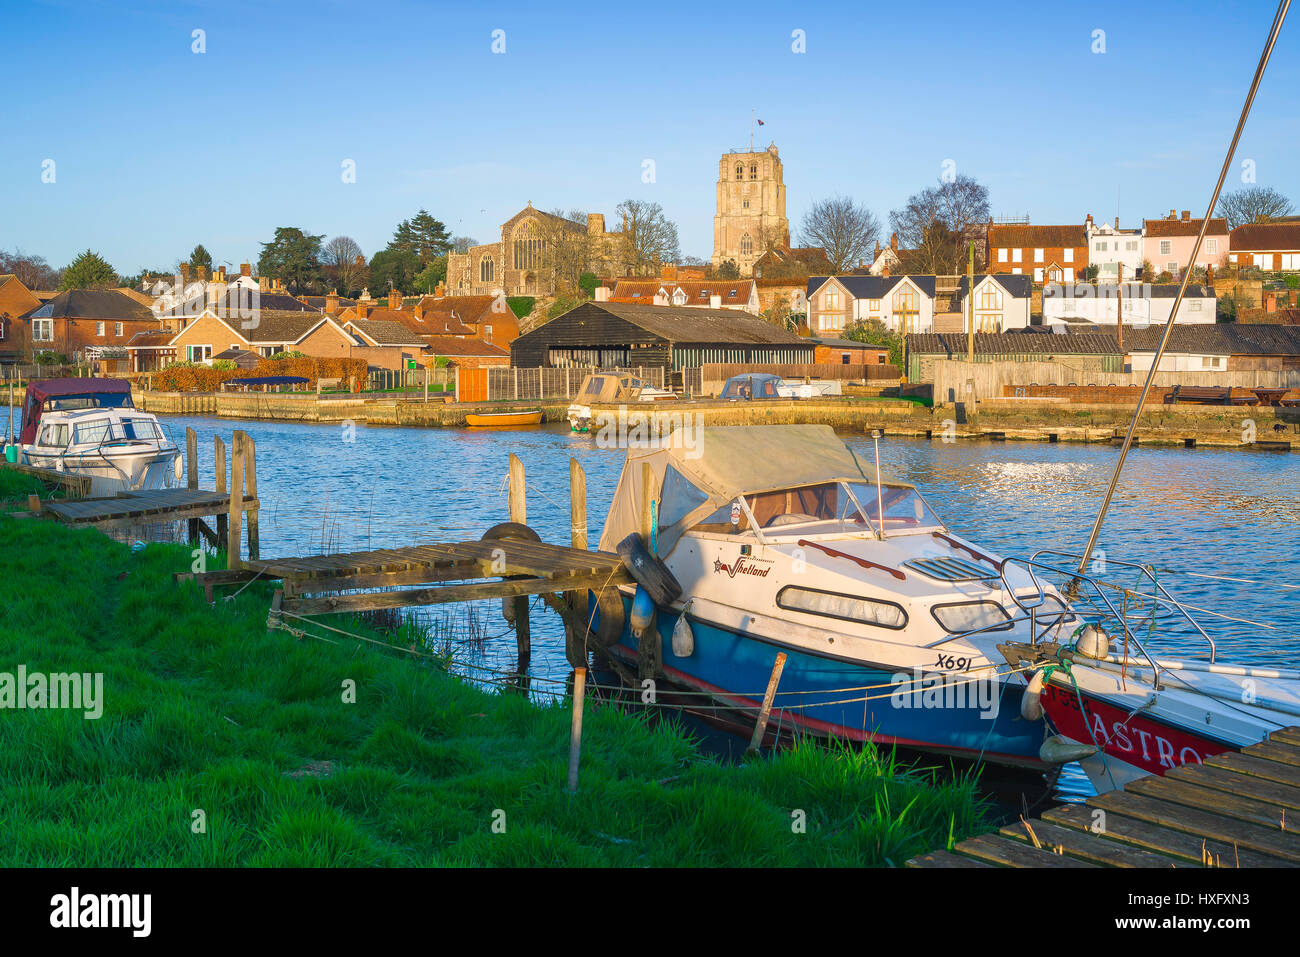 Suffolk landscape river, leisure boats moored along the River Waveney on the Norfolk Suffolk border near Beccles, Suffolk countryside, UK. Stock Photo